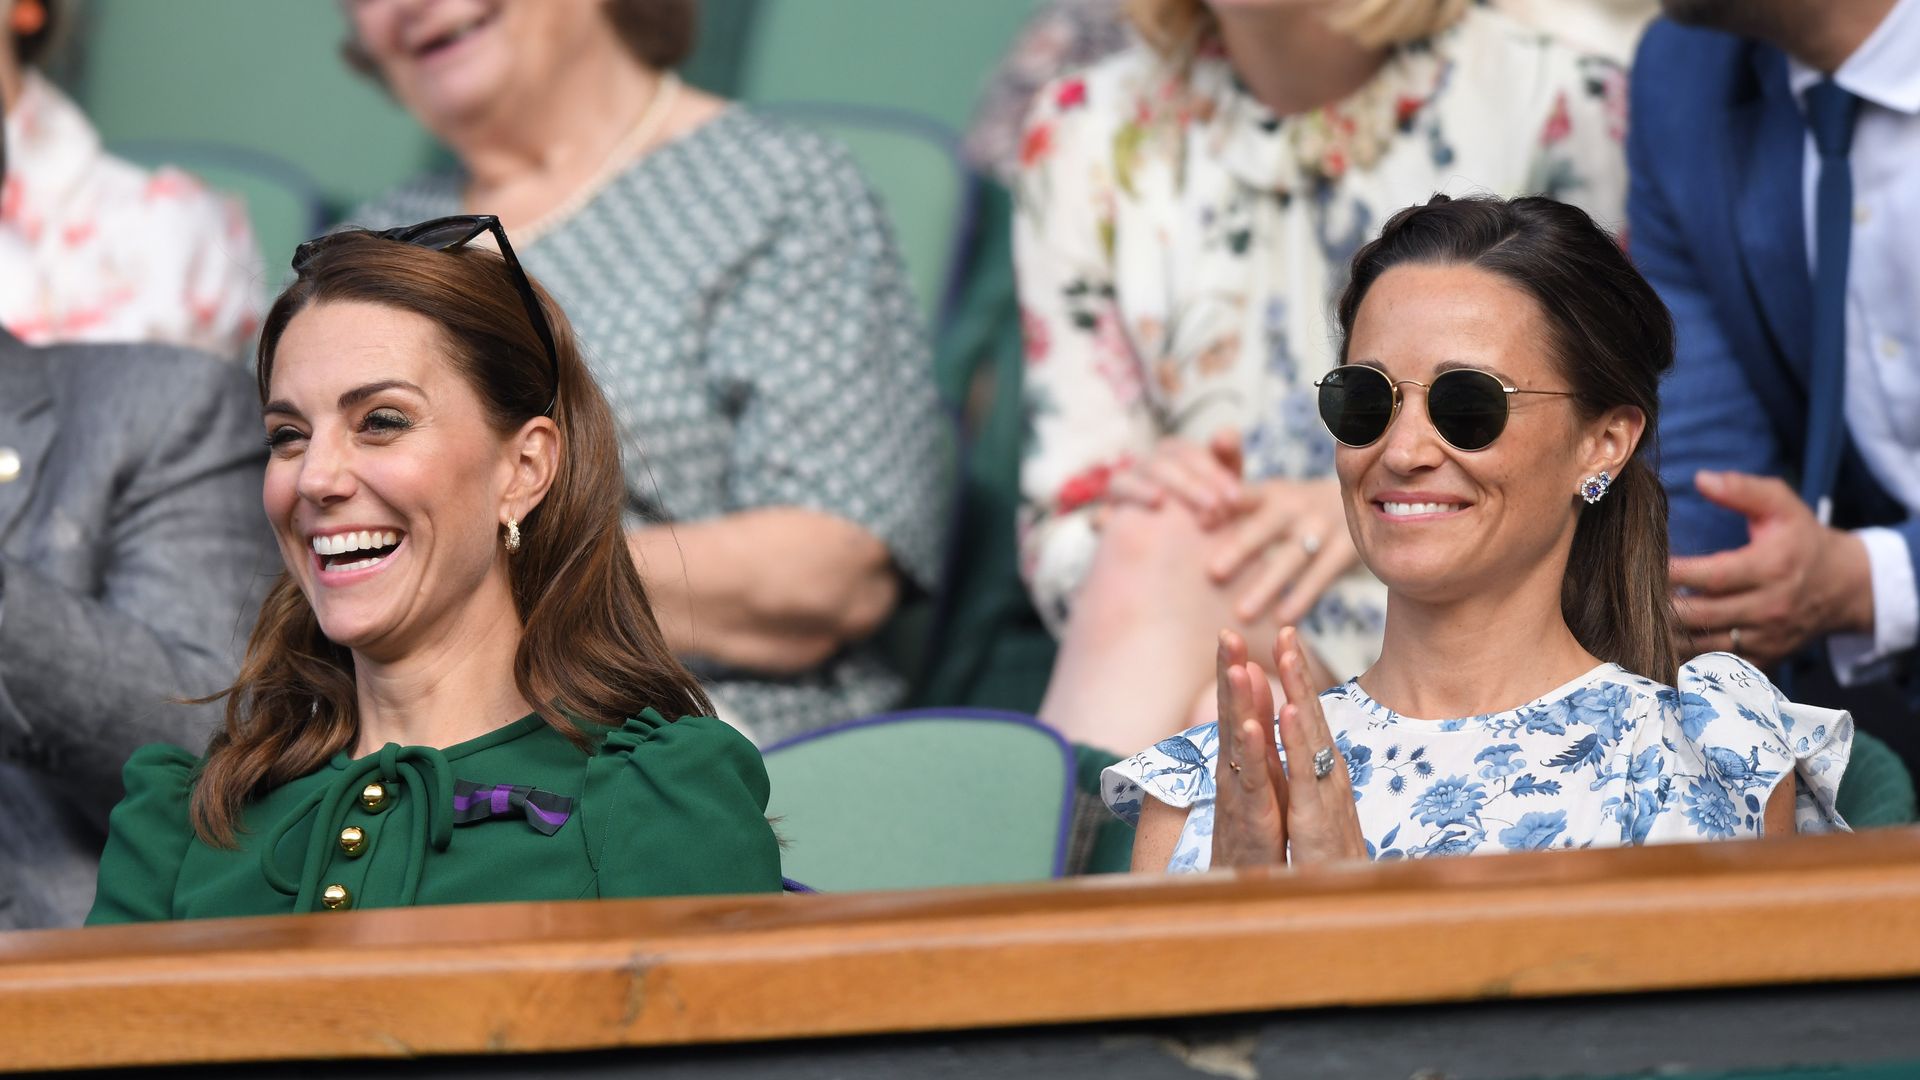 Kate and Pippa Middleton in the Royal Box on Centre Court during day twelve of the Wimbledon Tennis Championships in 2019